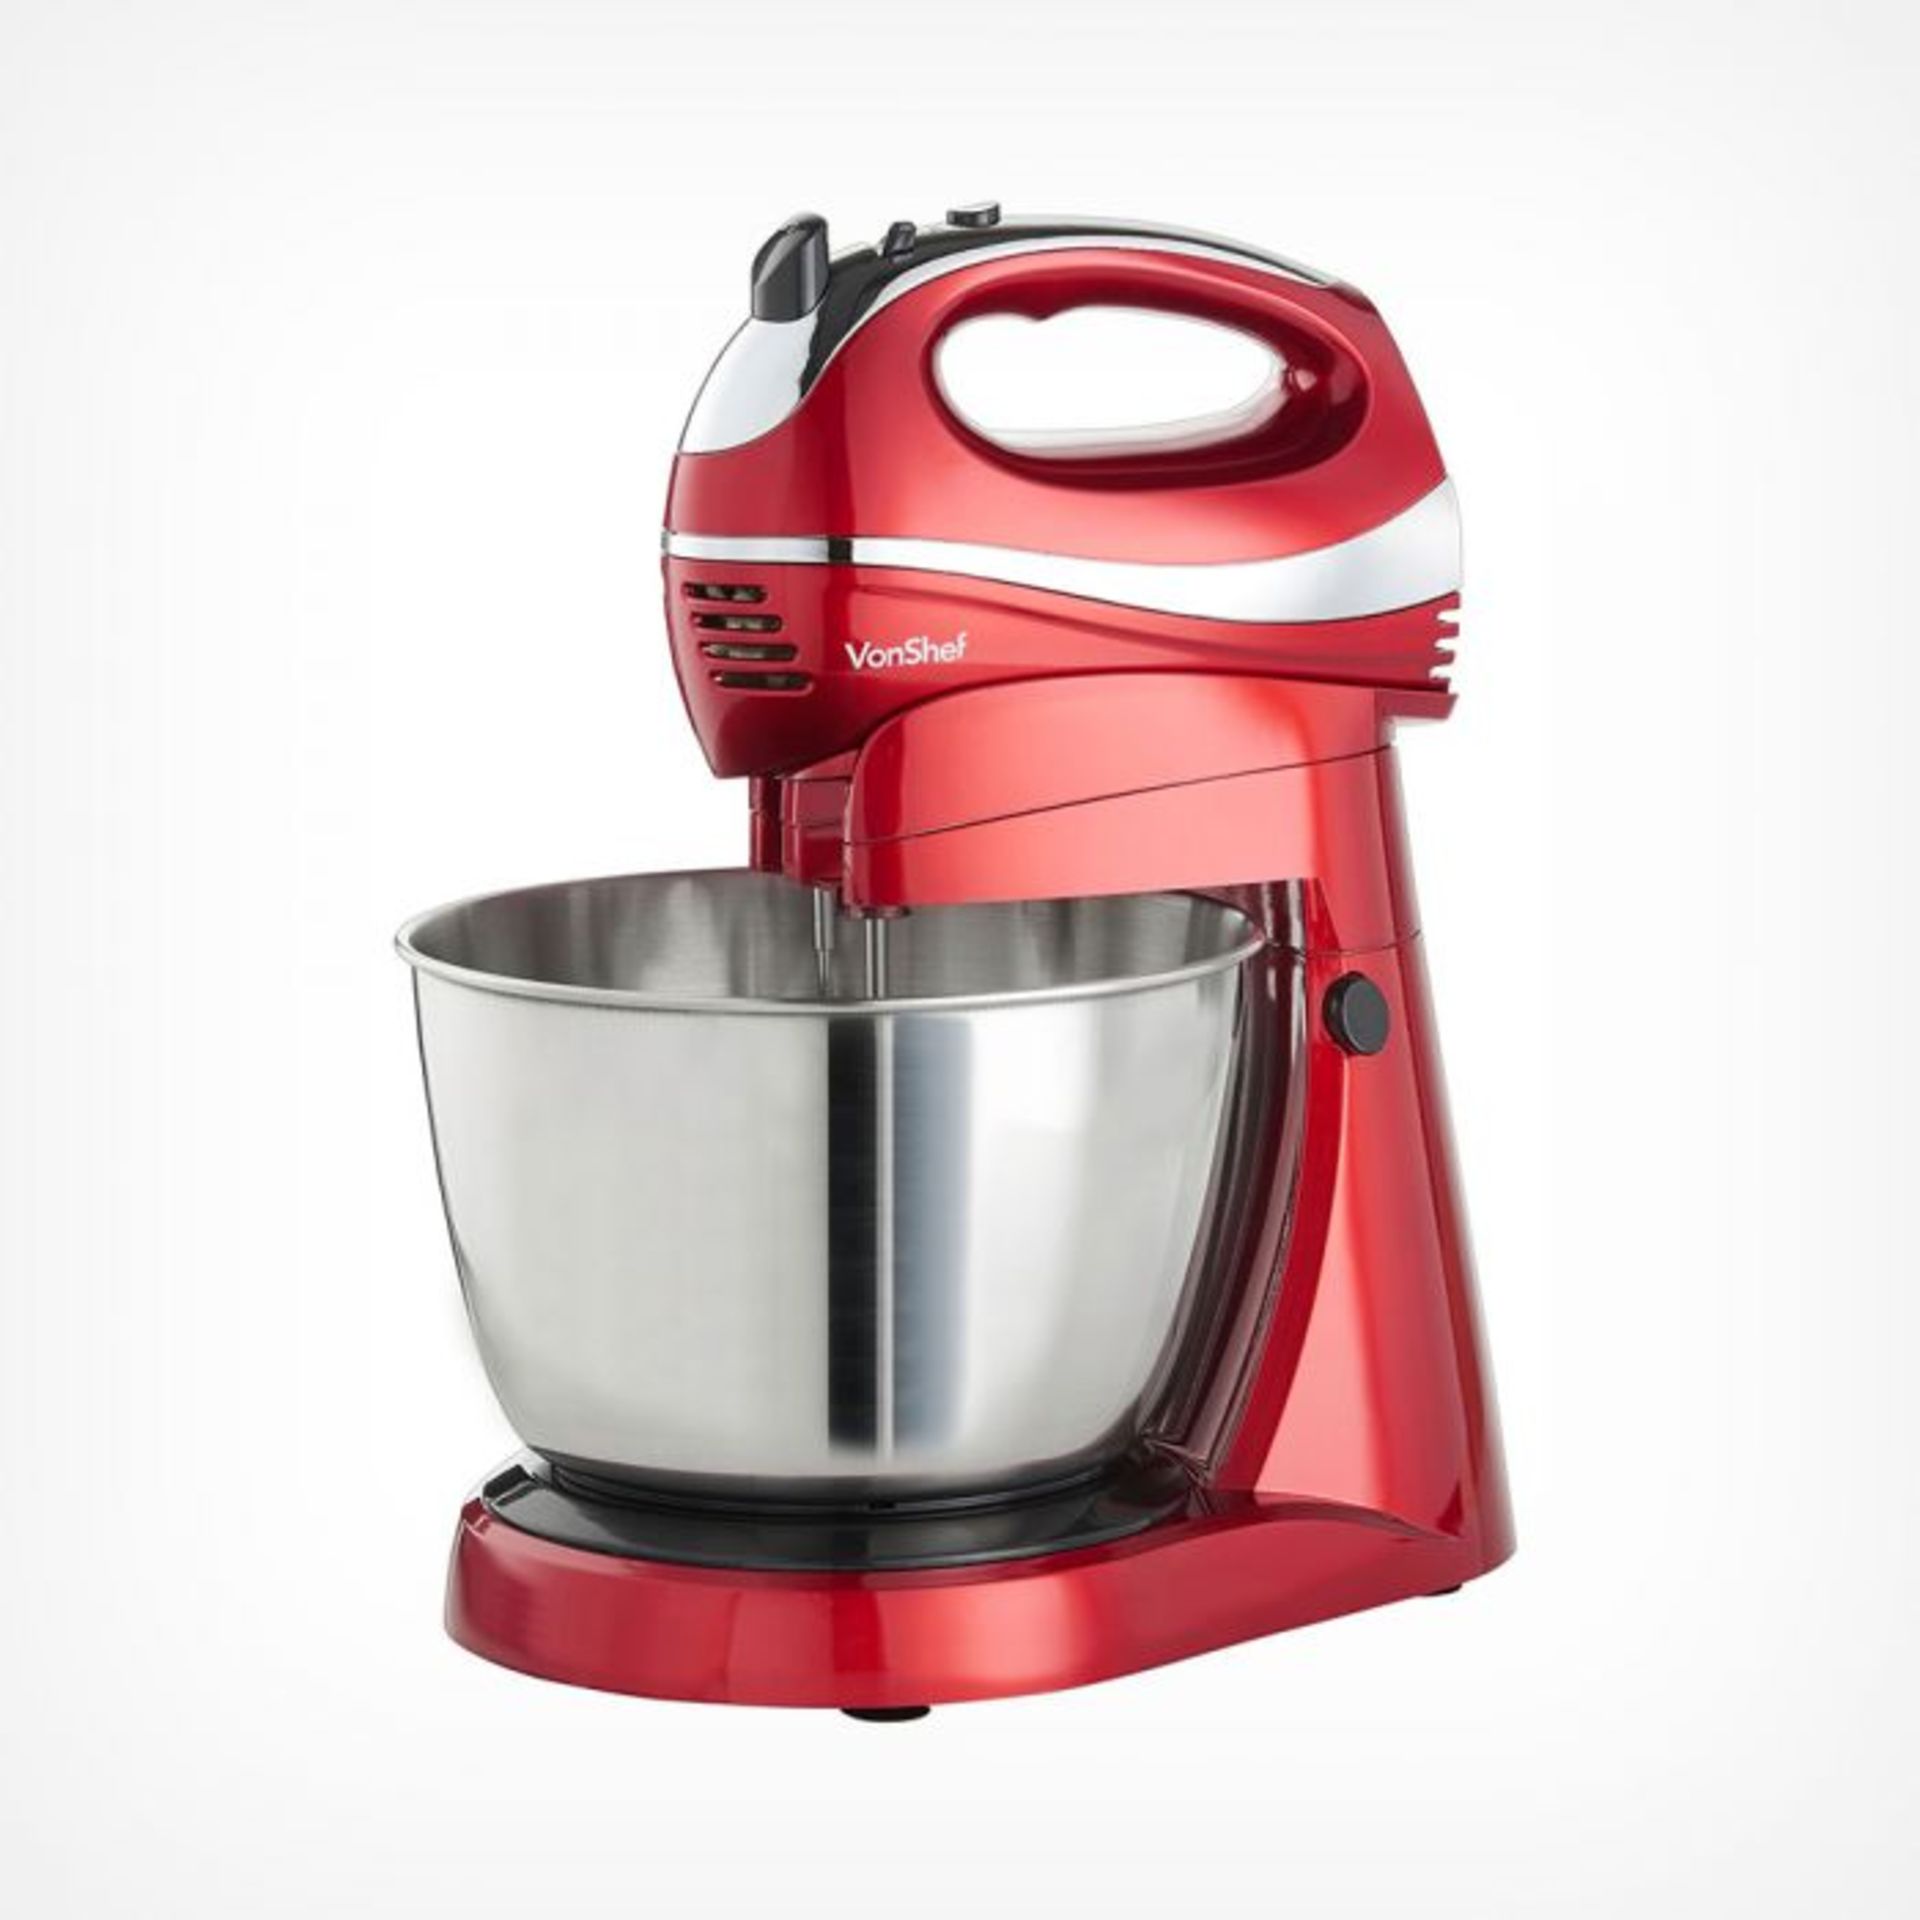 (S371) Red Hand & Stand Mixer The Red stand mixer and hand mixer is a must have kitchen applia... - Image 2 of 3